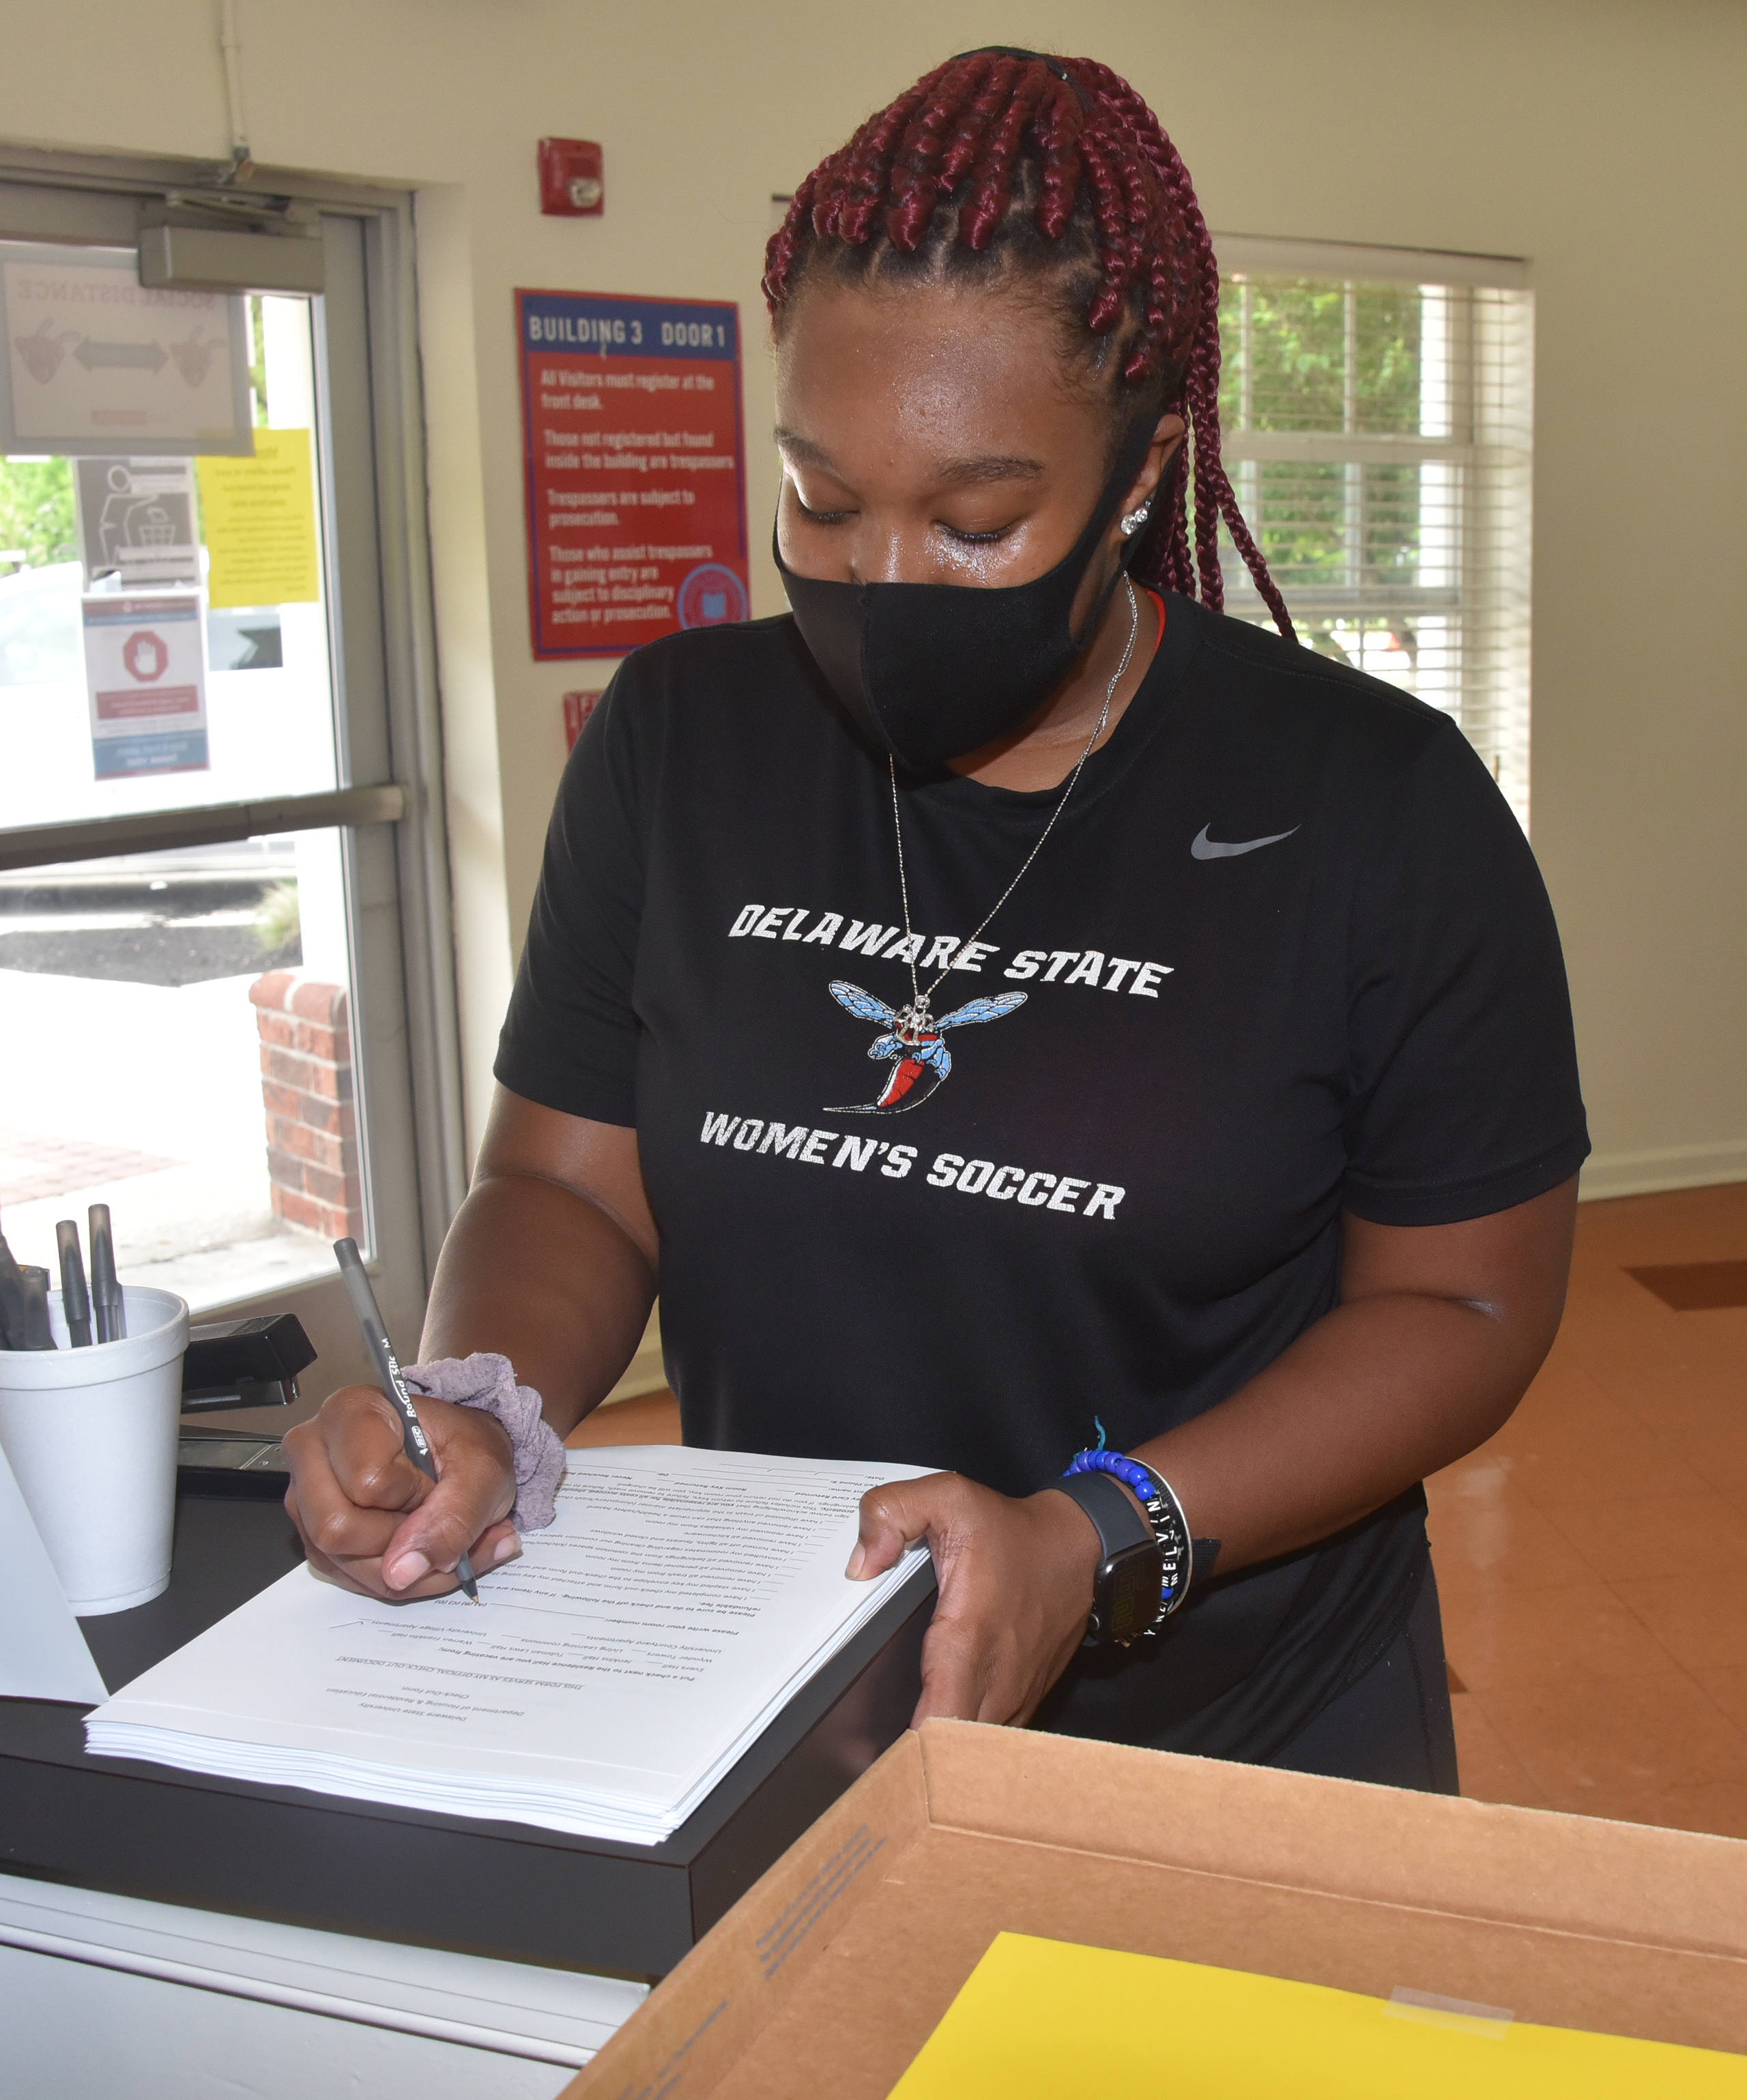 Jasmine Warren, a recent graduate, completes a check-out form, which she will leave with her University Village apartment key.